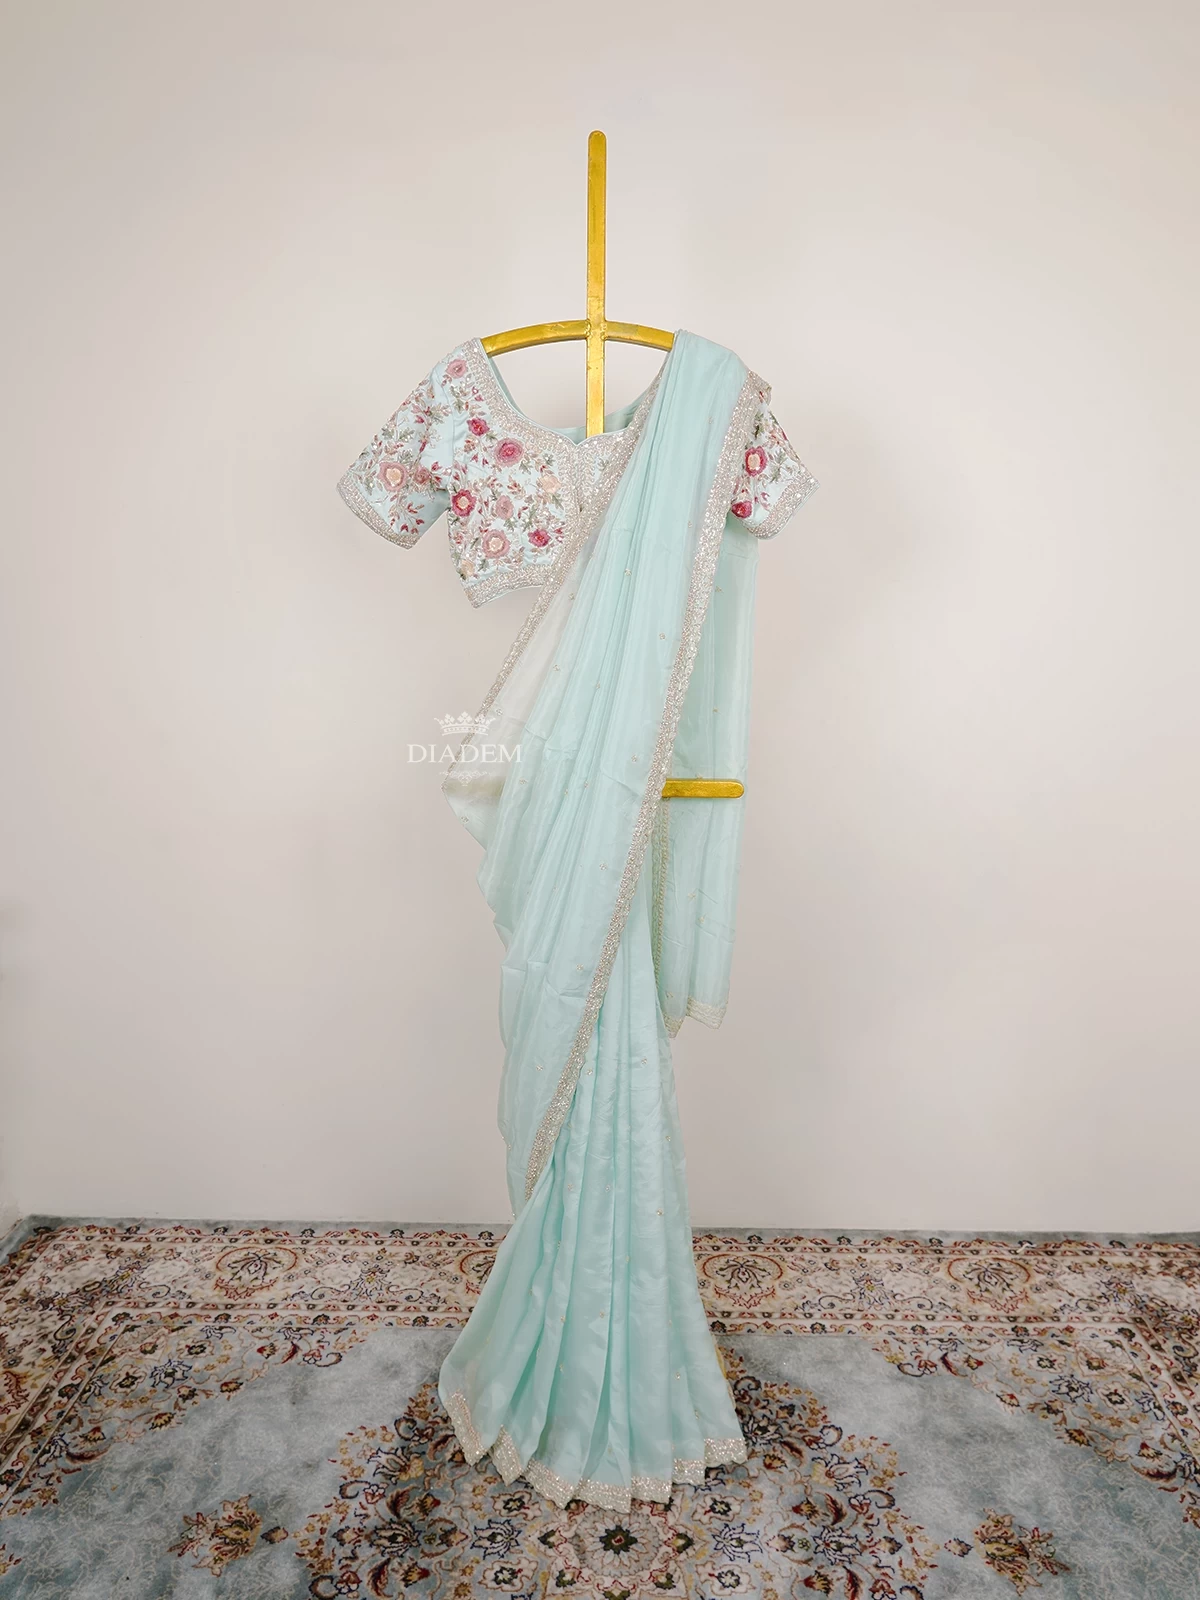 Light Blue Organza Saree with Sequins and Beads Embellished Border paired with Designer Blouse